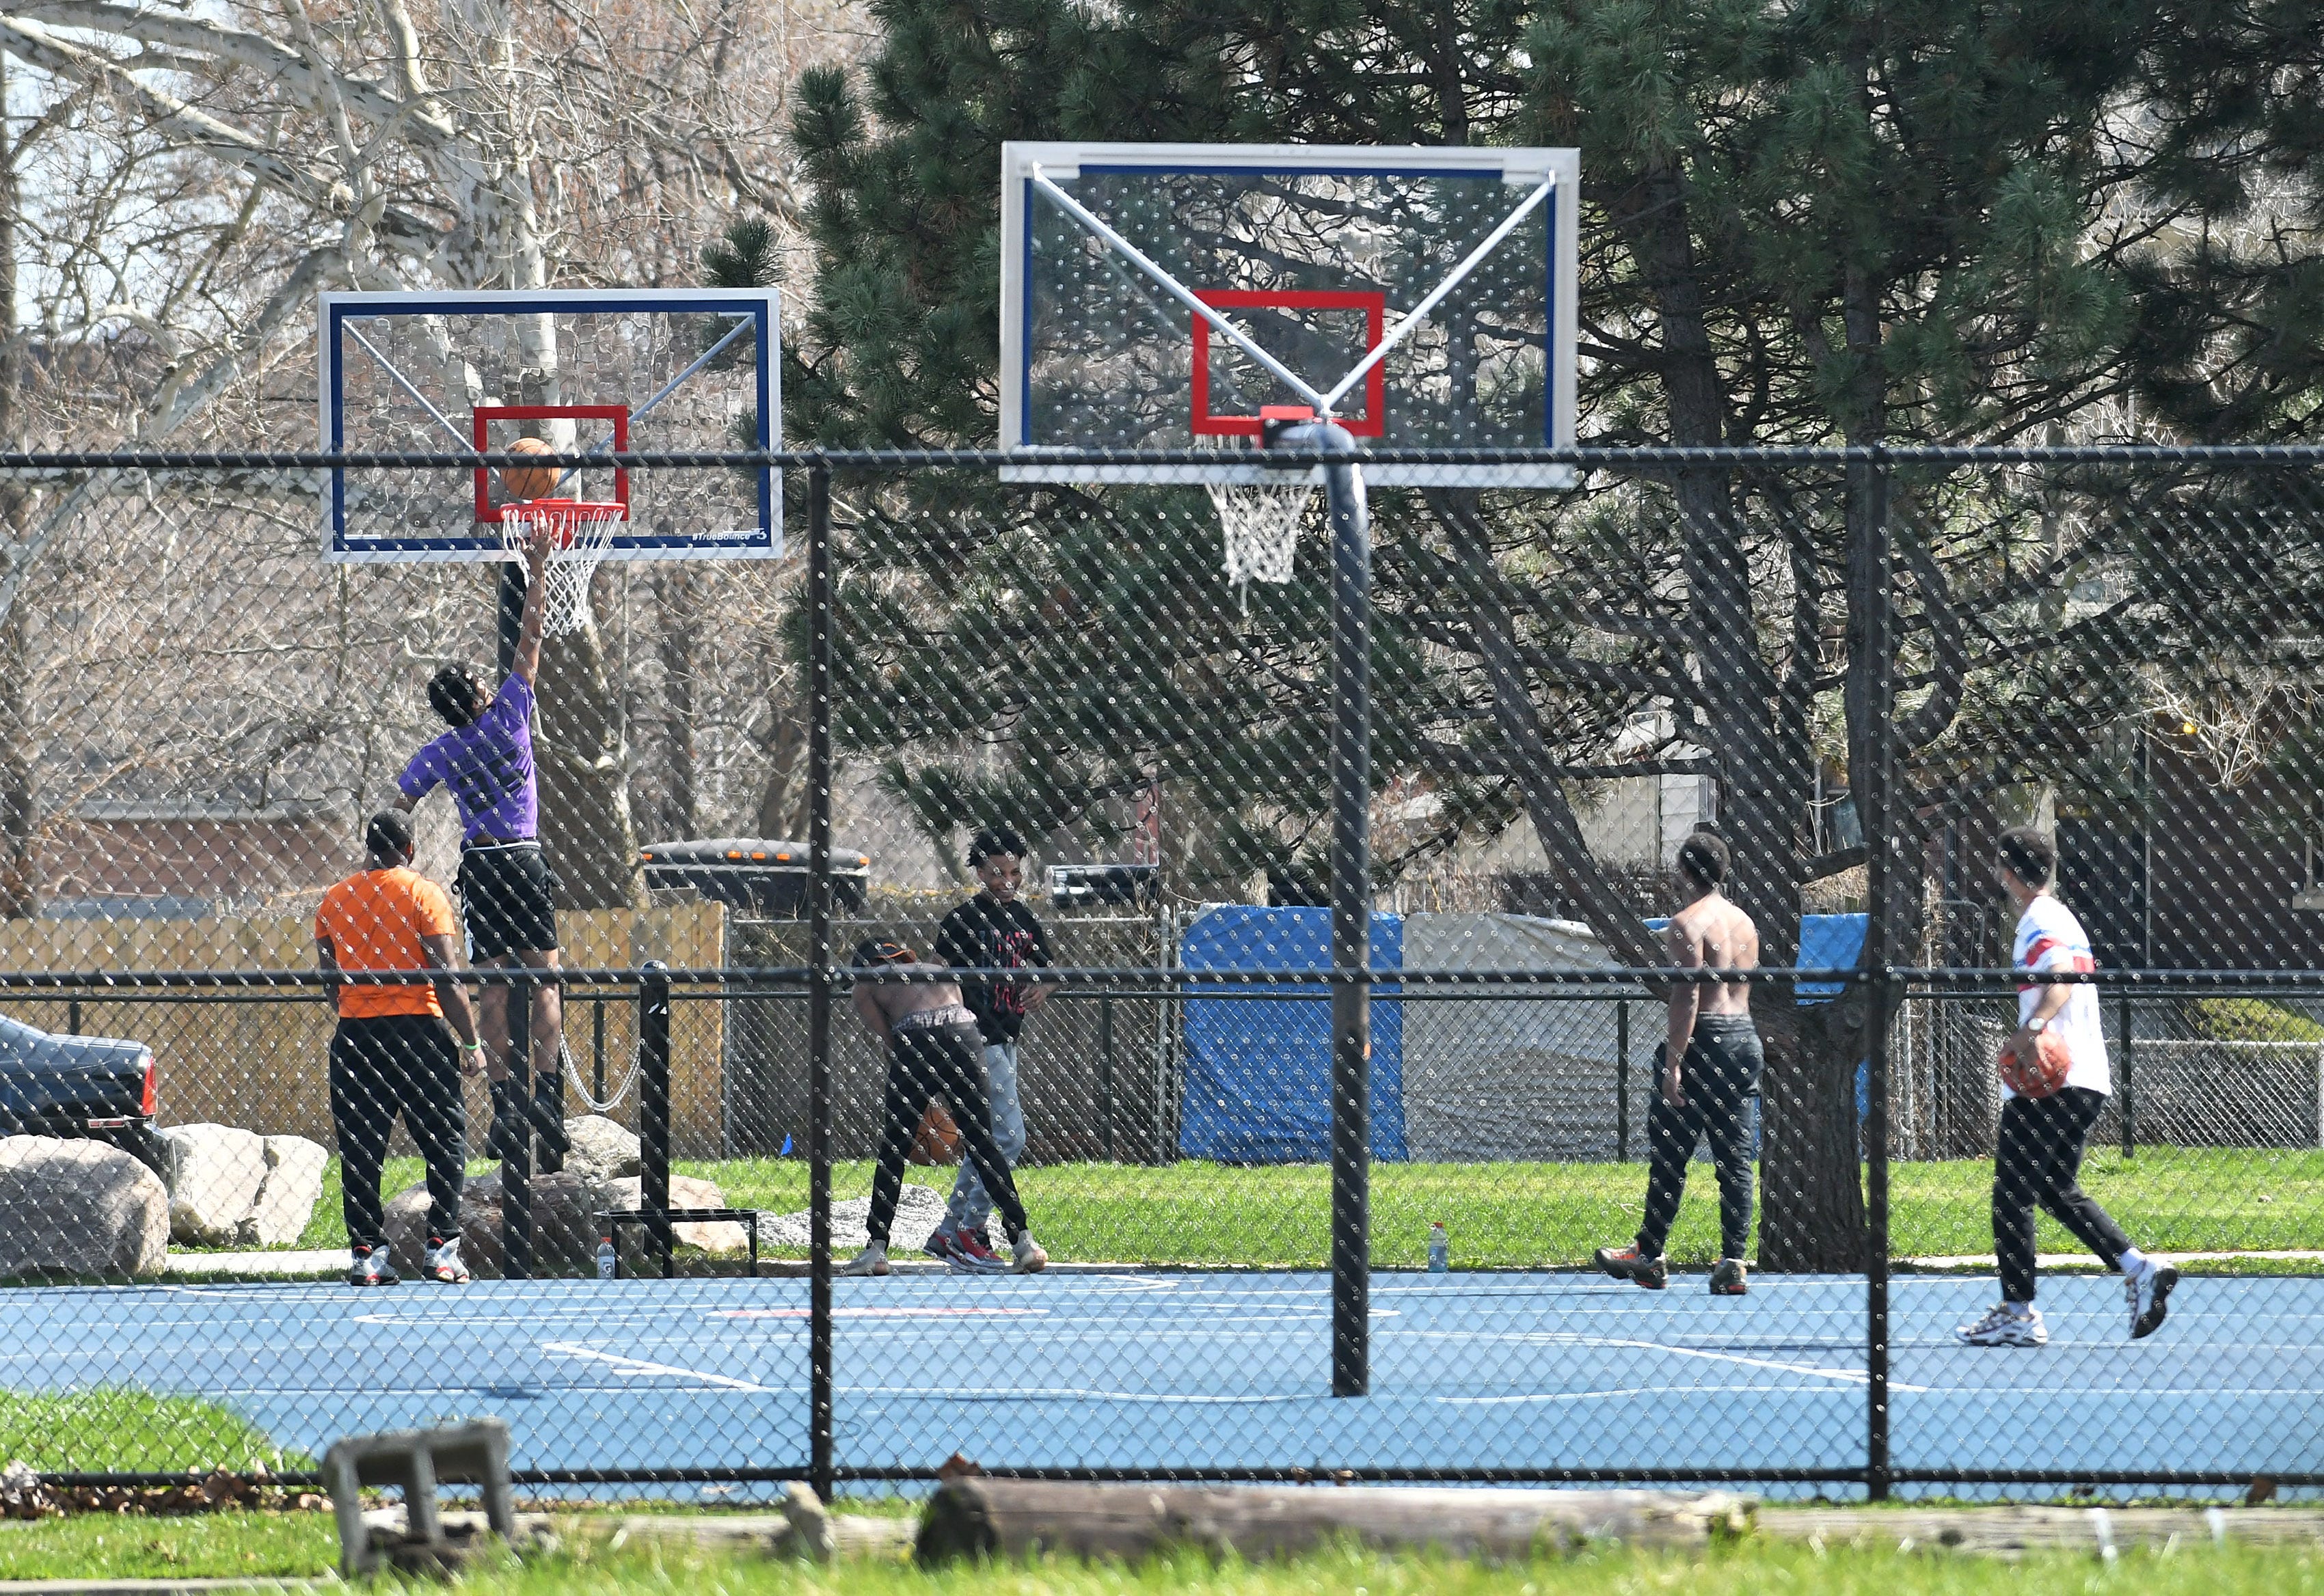 Some young men shoot around on a basketball court at Delores Bennett Park in Detroit on April 8, 2020.